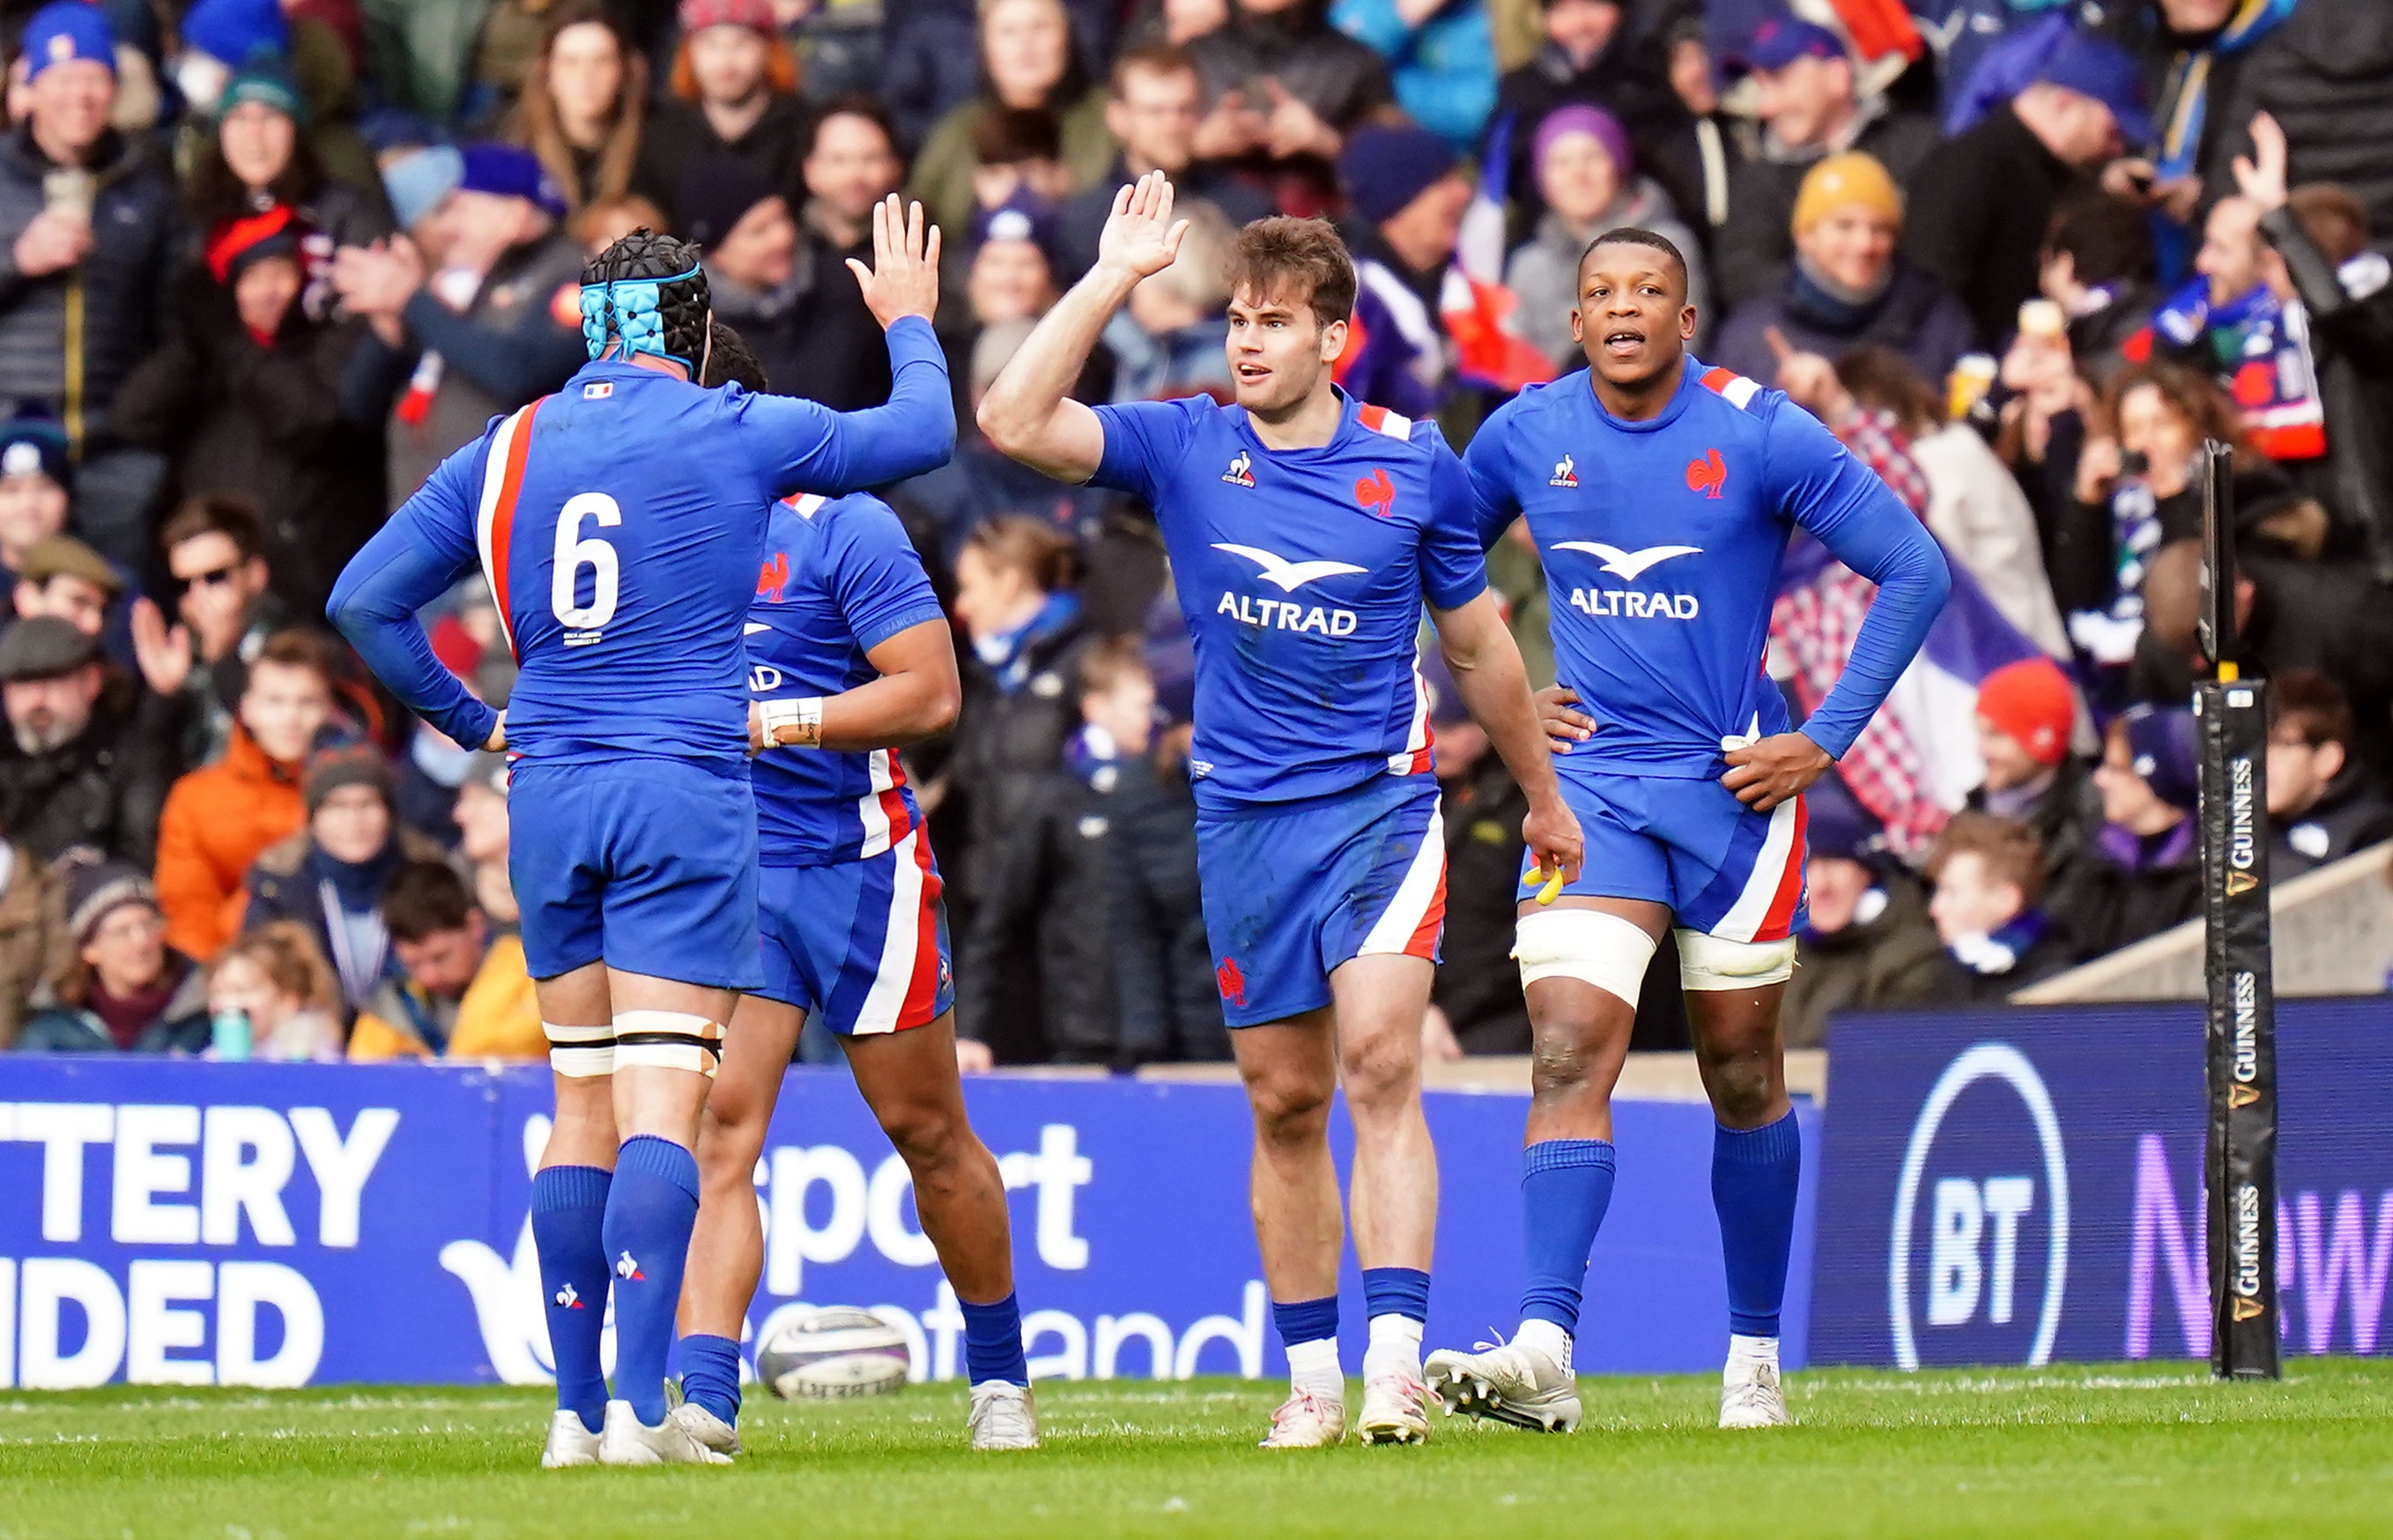 Damian Penaud scored two tries for France in the 36-17 win over Scotland